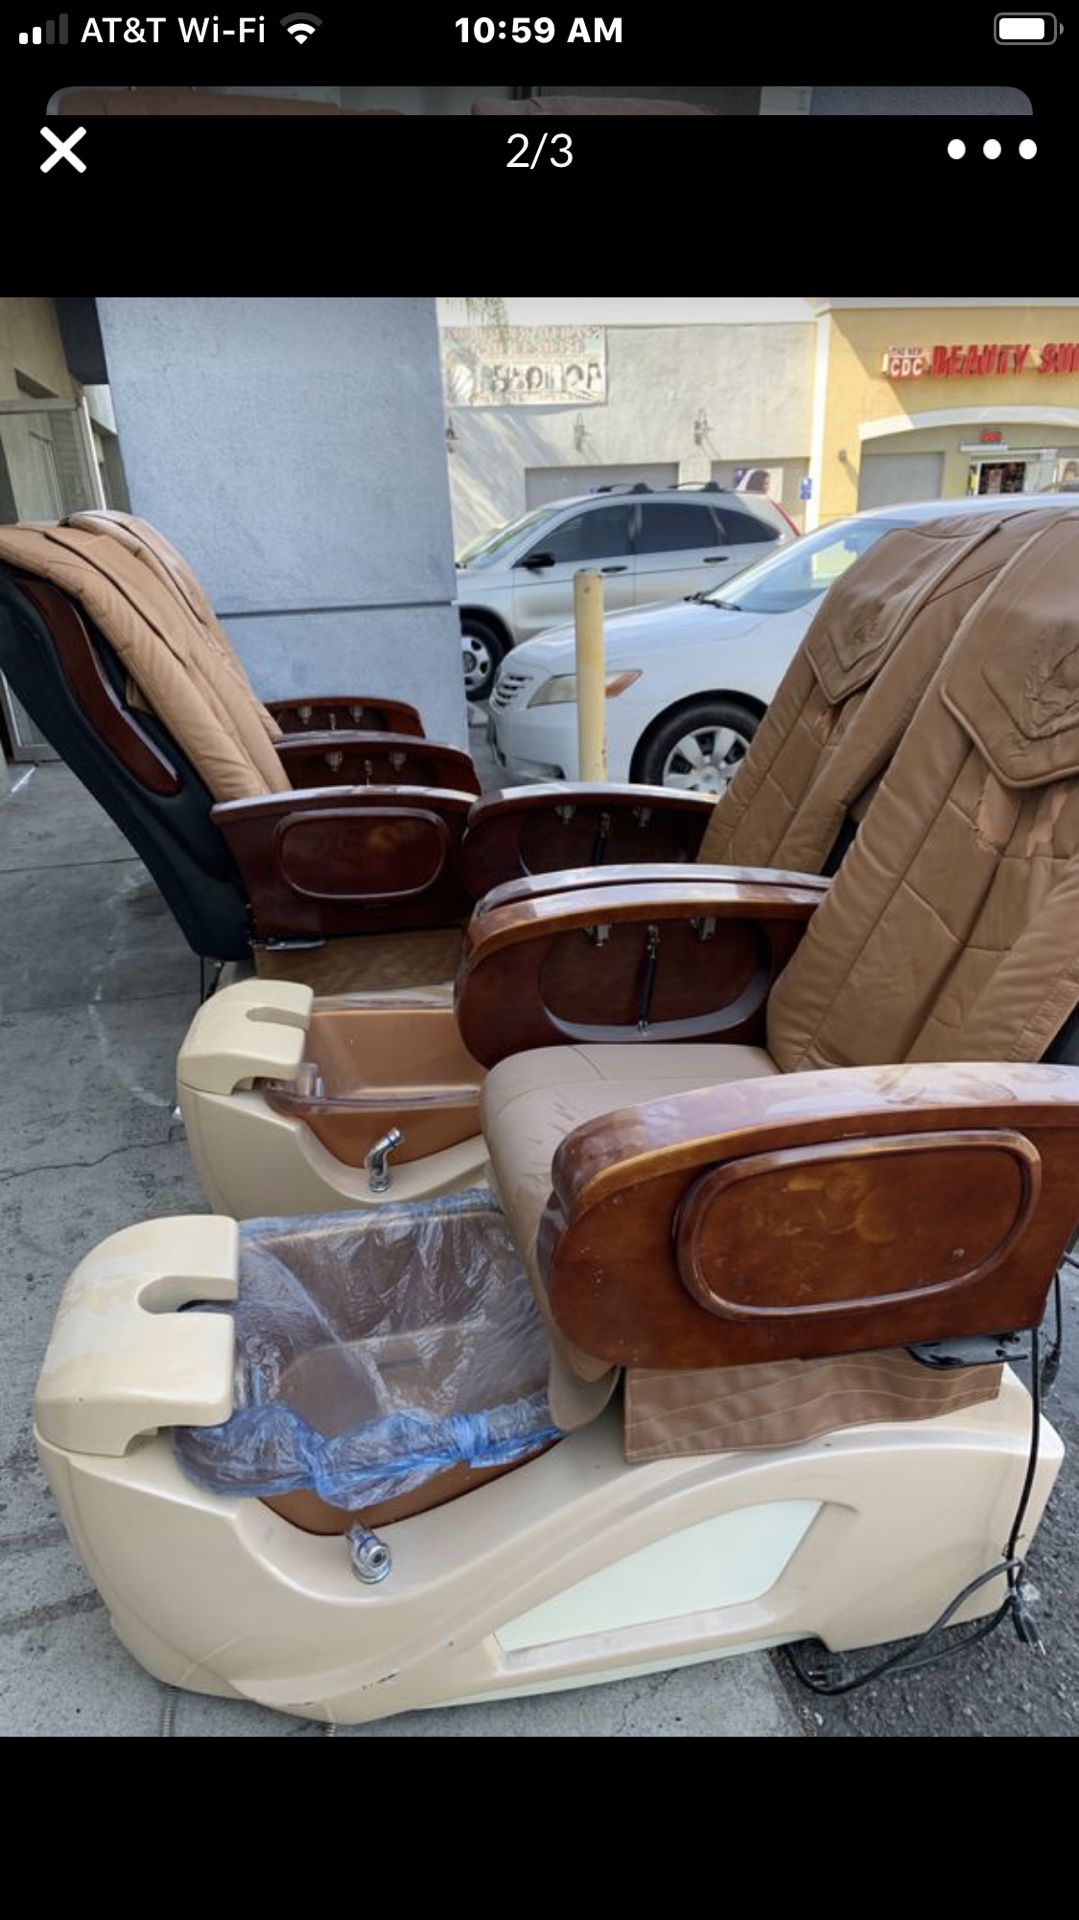 Spa pedicure chairs both must go free